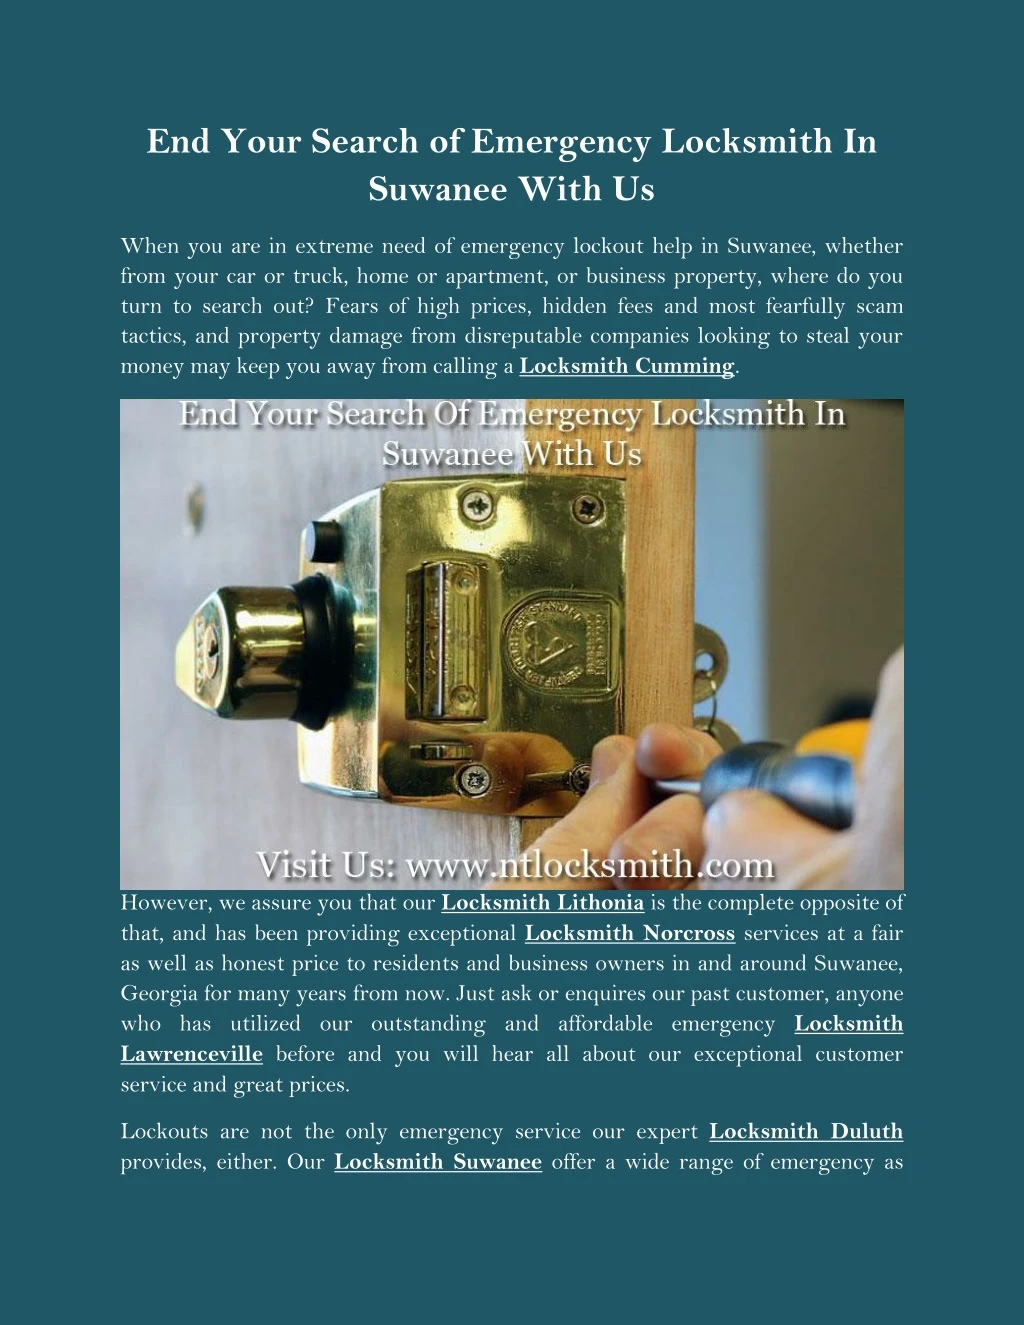 end your search of emergency locksmith in suwanee